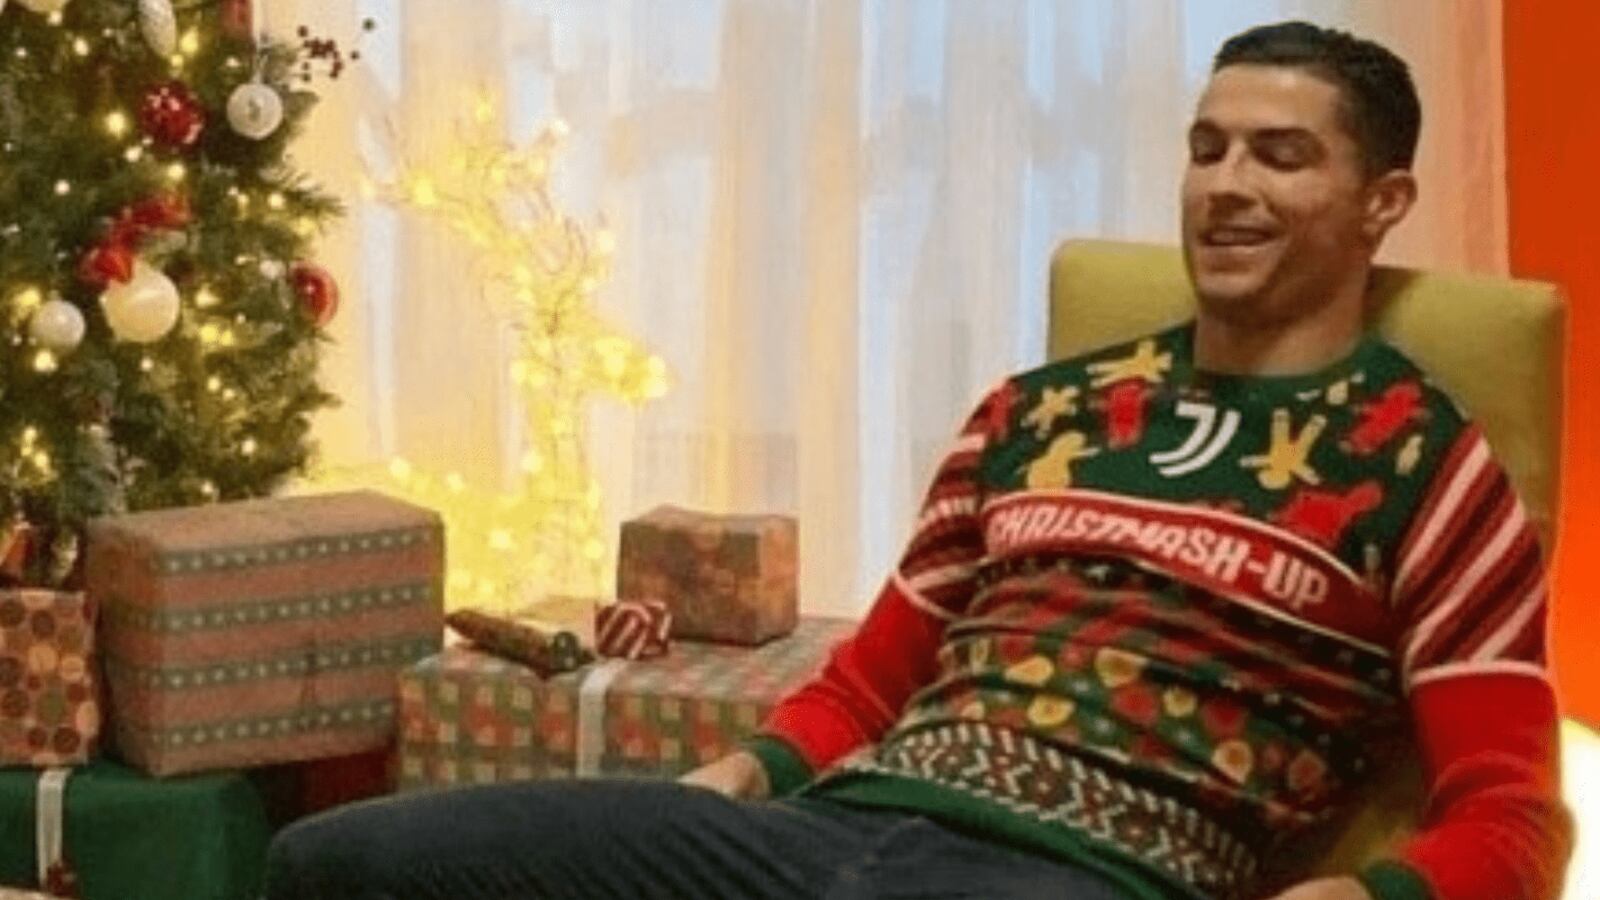 Football top champion surprised by Cristiano Ronaldo’s incredible Christmas gift